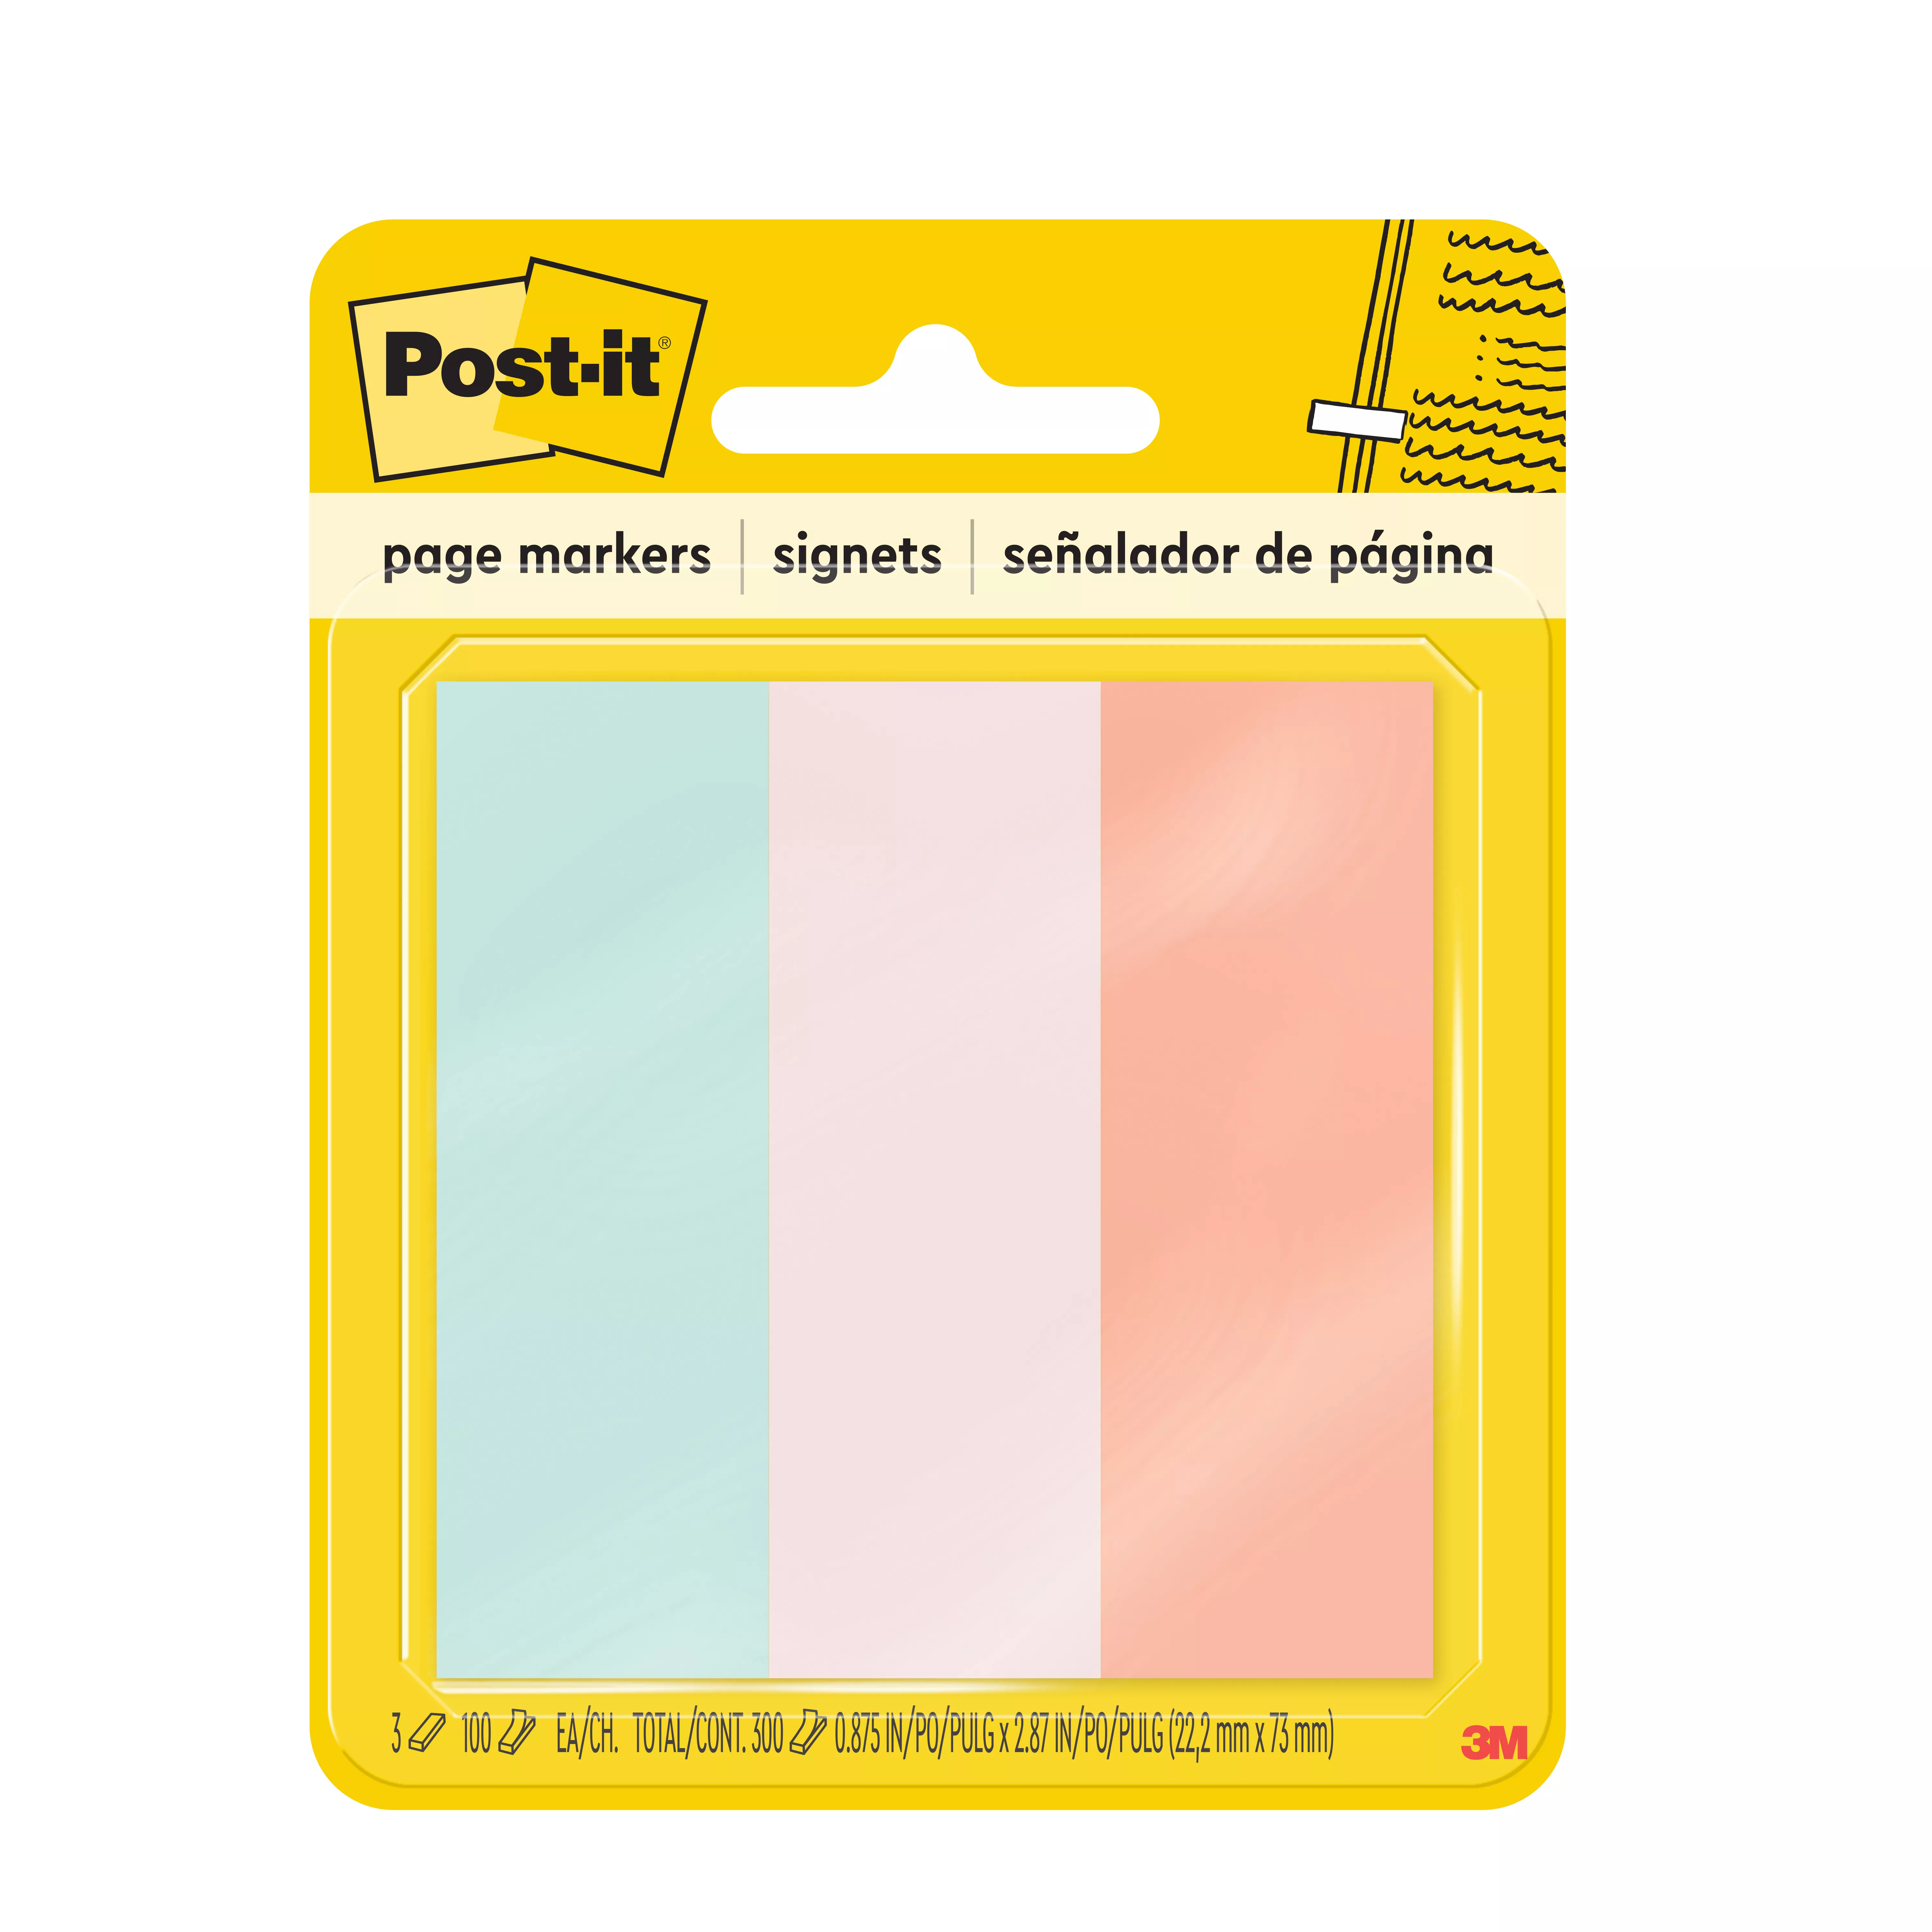 Post-it® Page Markers 5487 7/8 in x 2-7/8 in Neon 100sht/pd, 3pd/pk